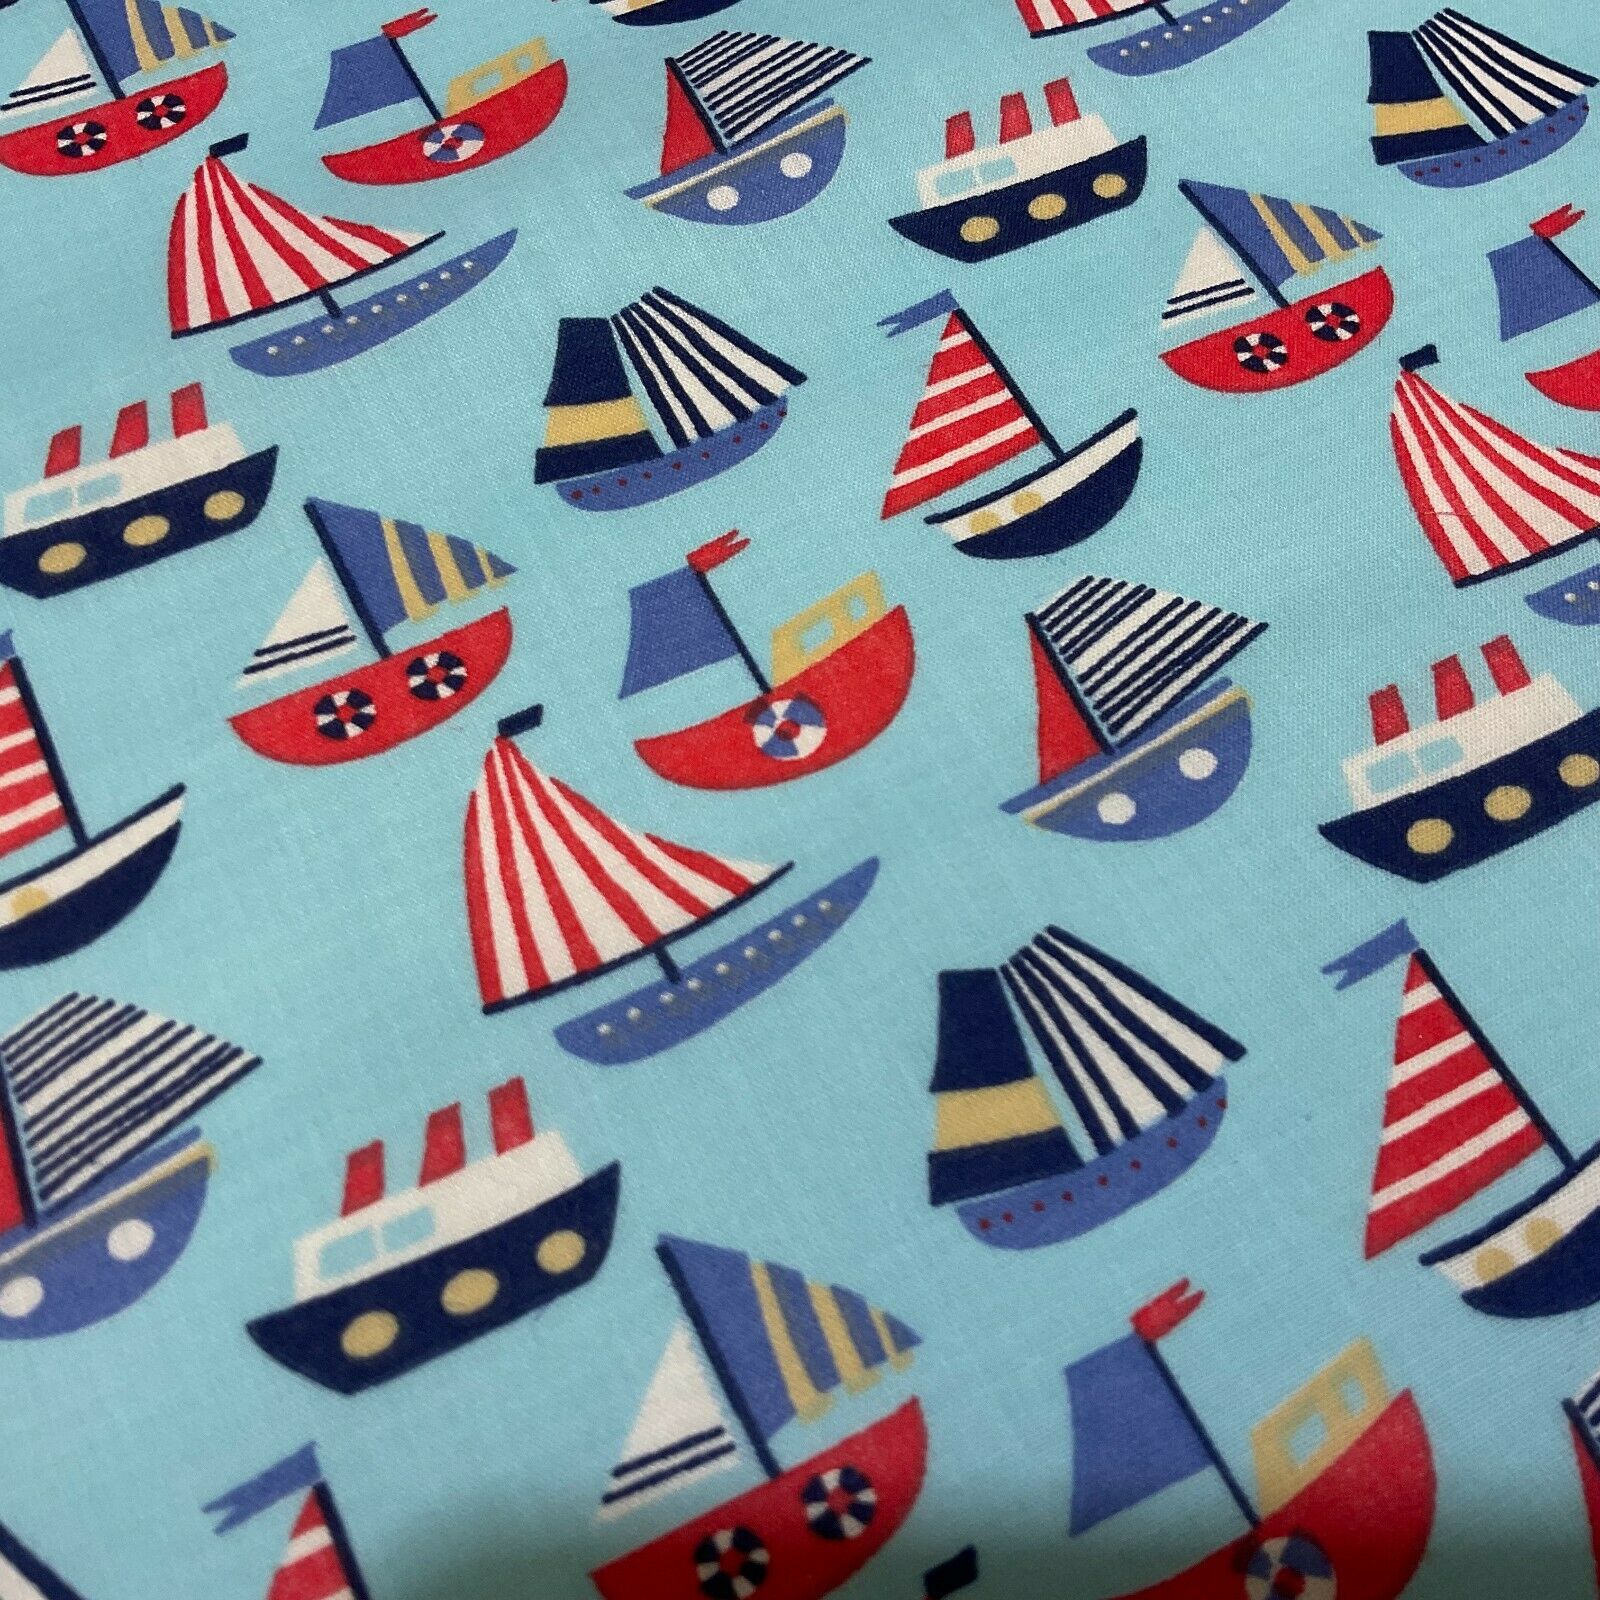 Boats sea Novelty Children Poly cotton printed lightweight fabric M1627